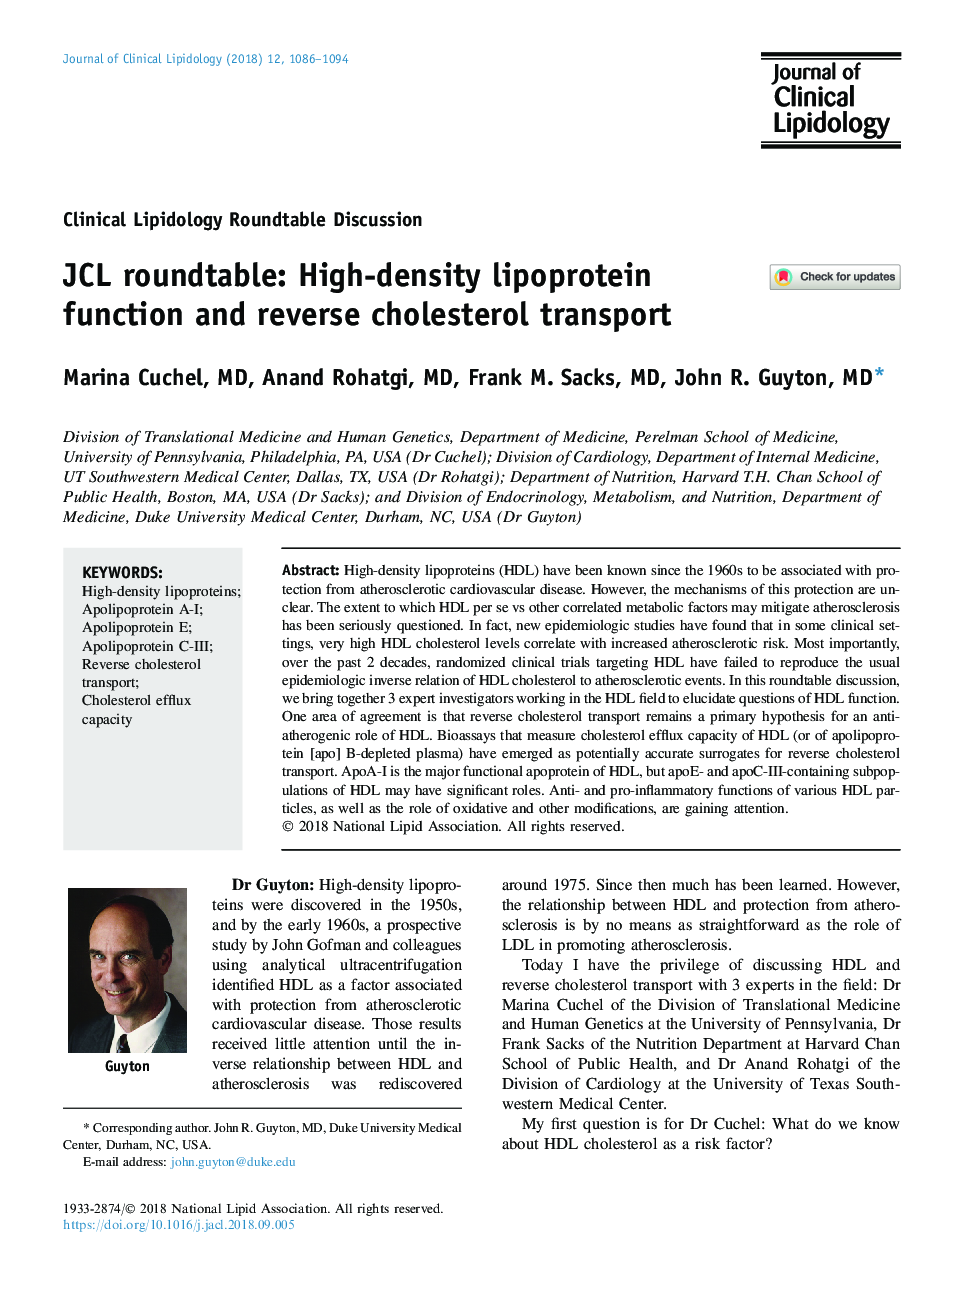 JCL roundtable: High-density lipoprotein function and reverse cholesterol transport